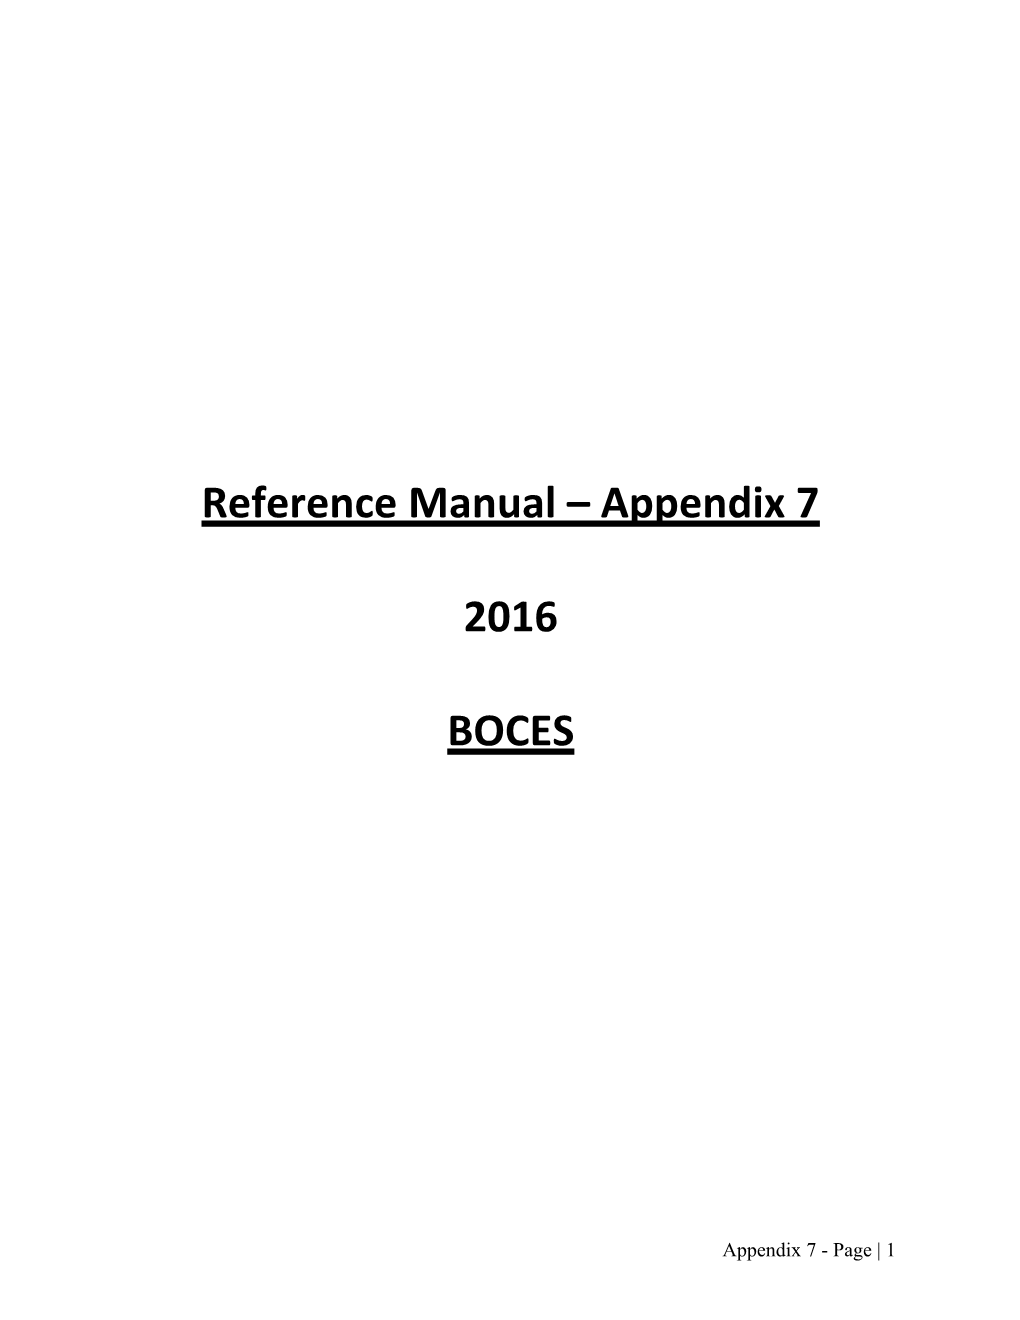 Reference Manual Appendix 7